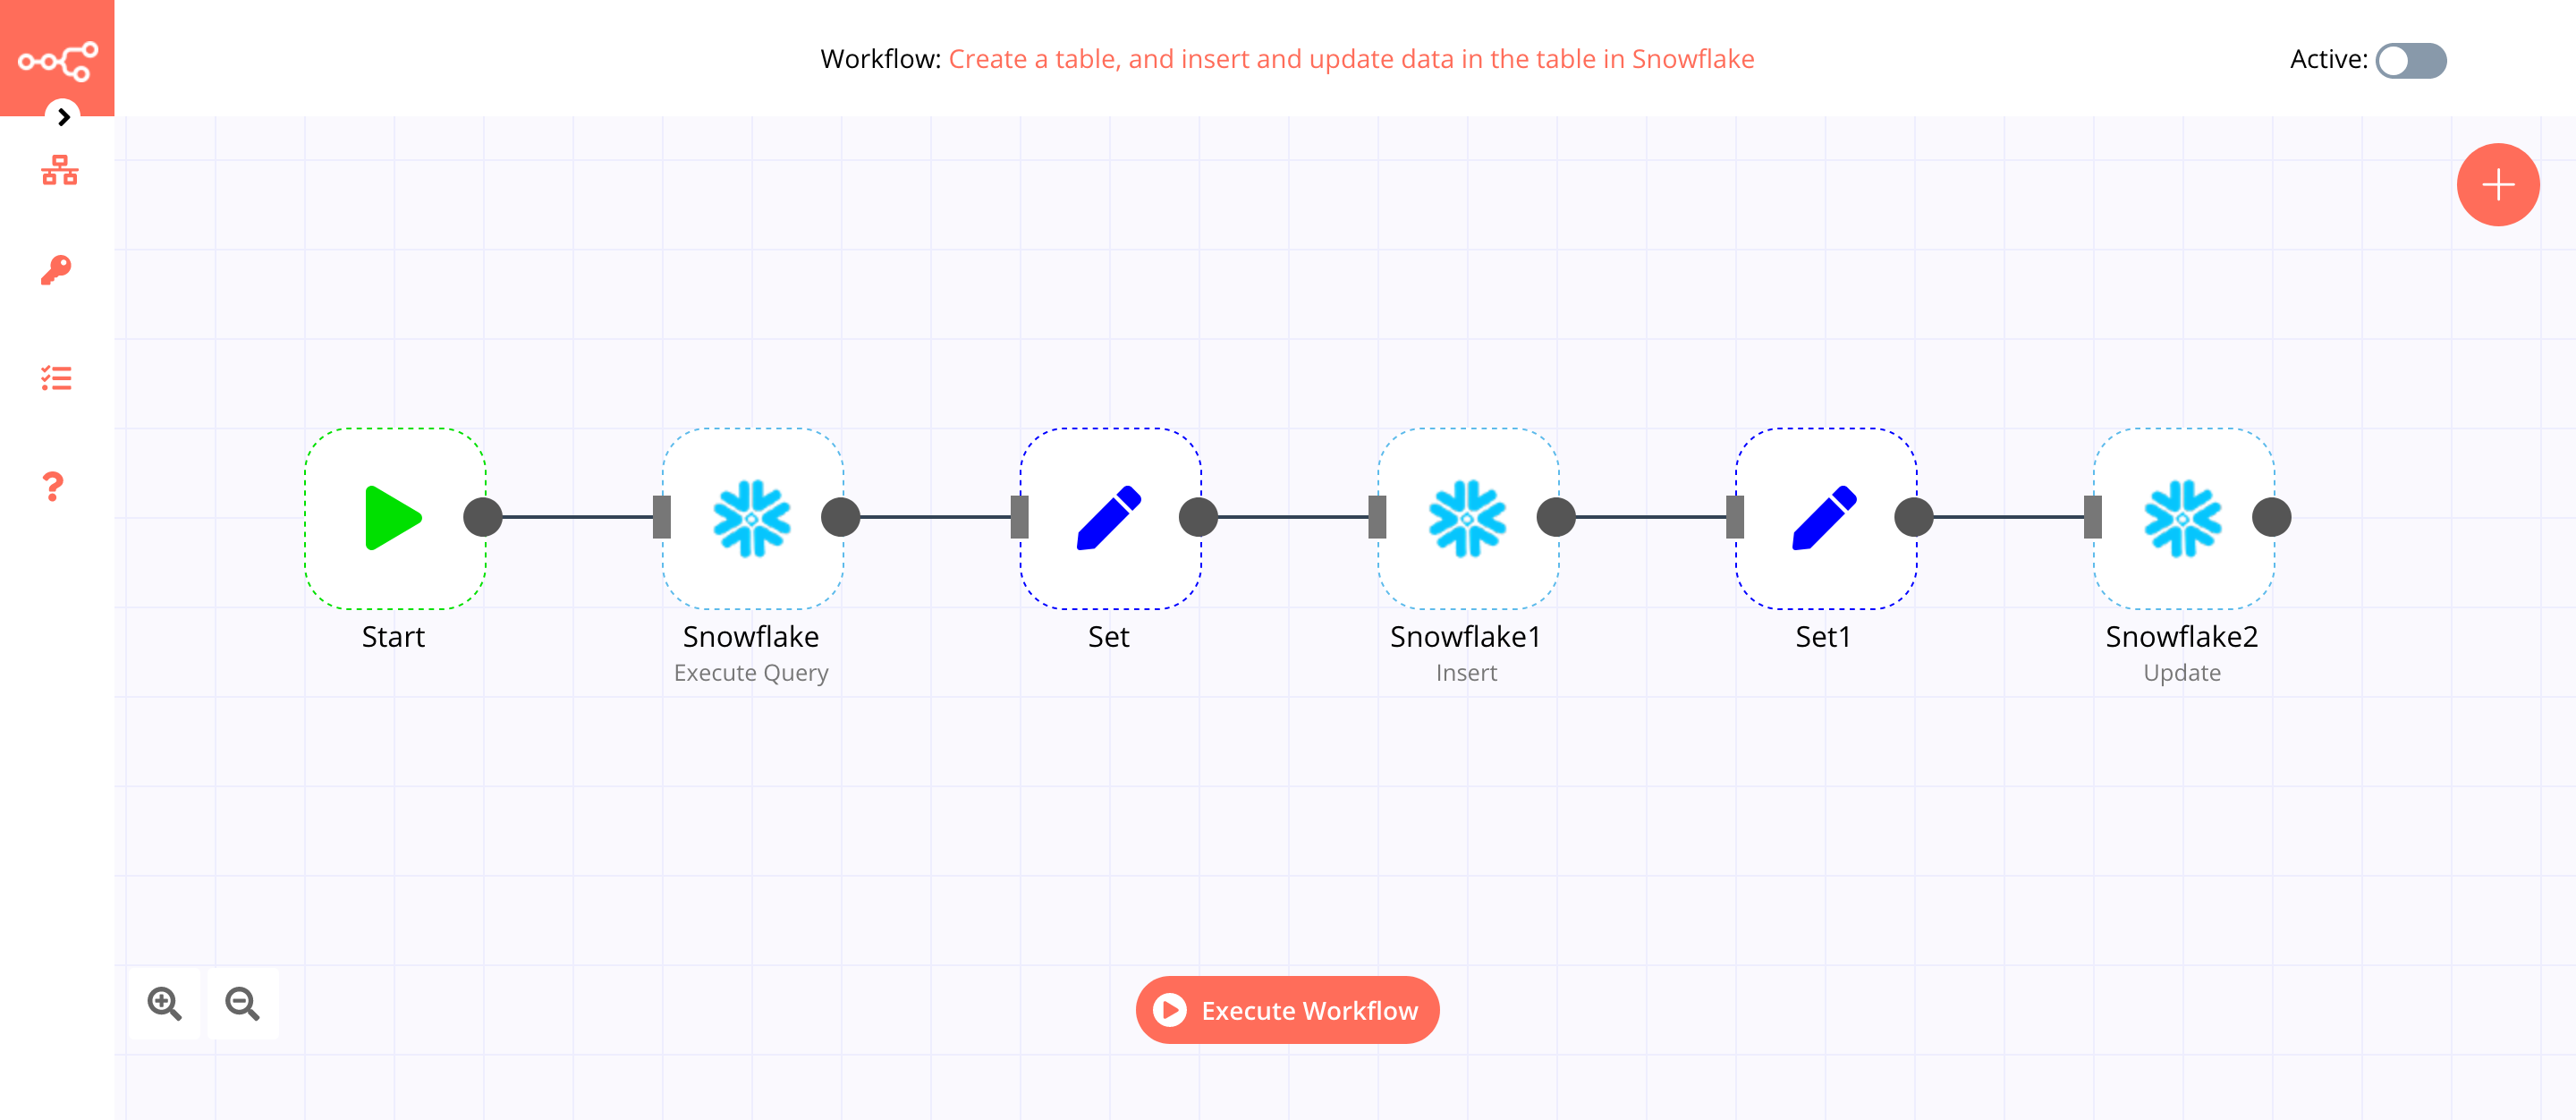 A workflow with the Snowflake node